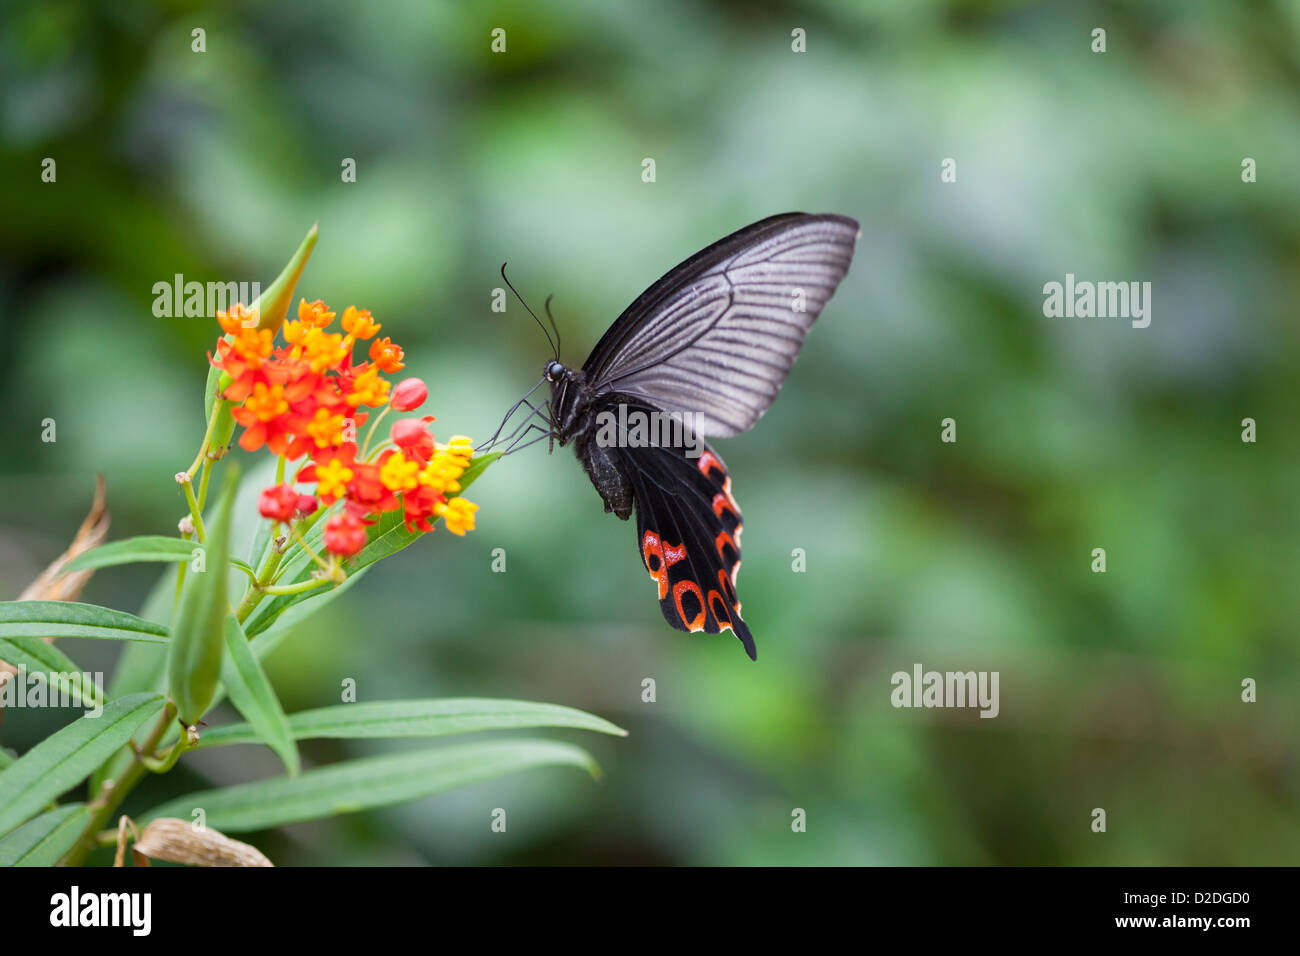 Papilio helenus, a swallowtail butterfly, hovering by a flower to gather nectar. Stock Photo